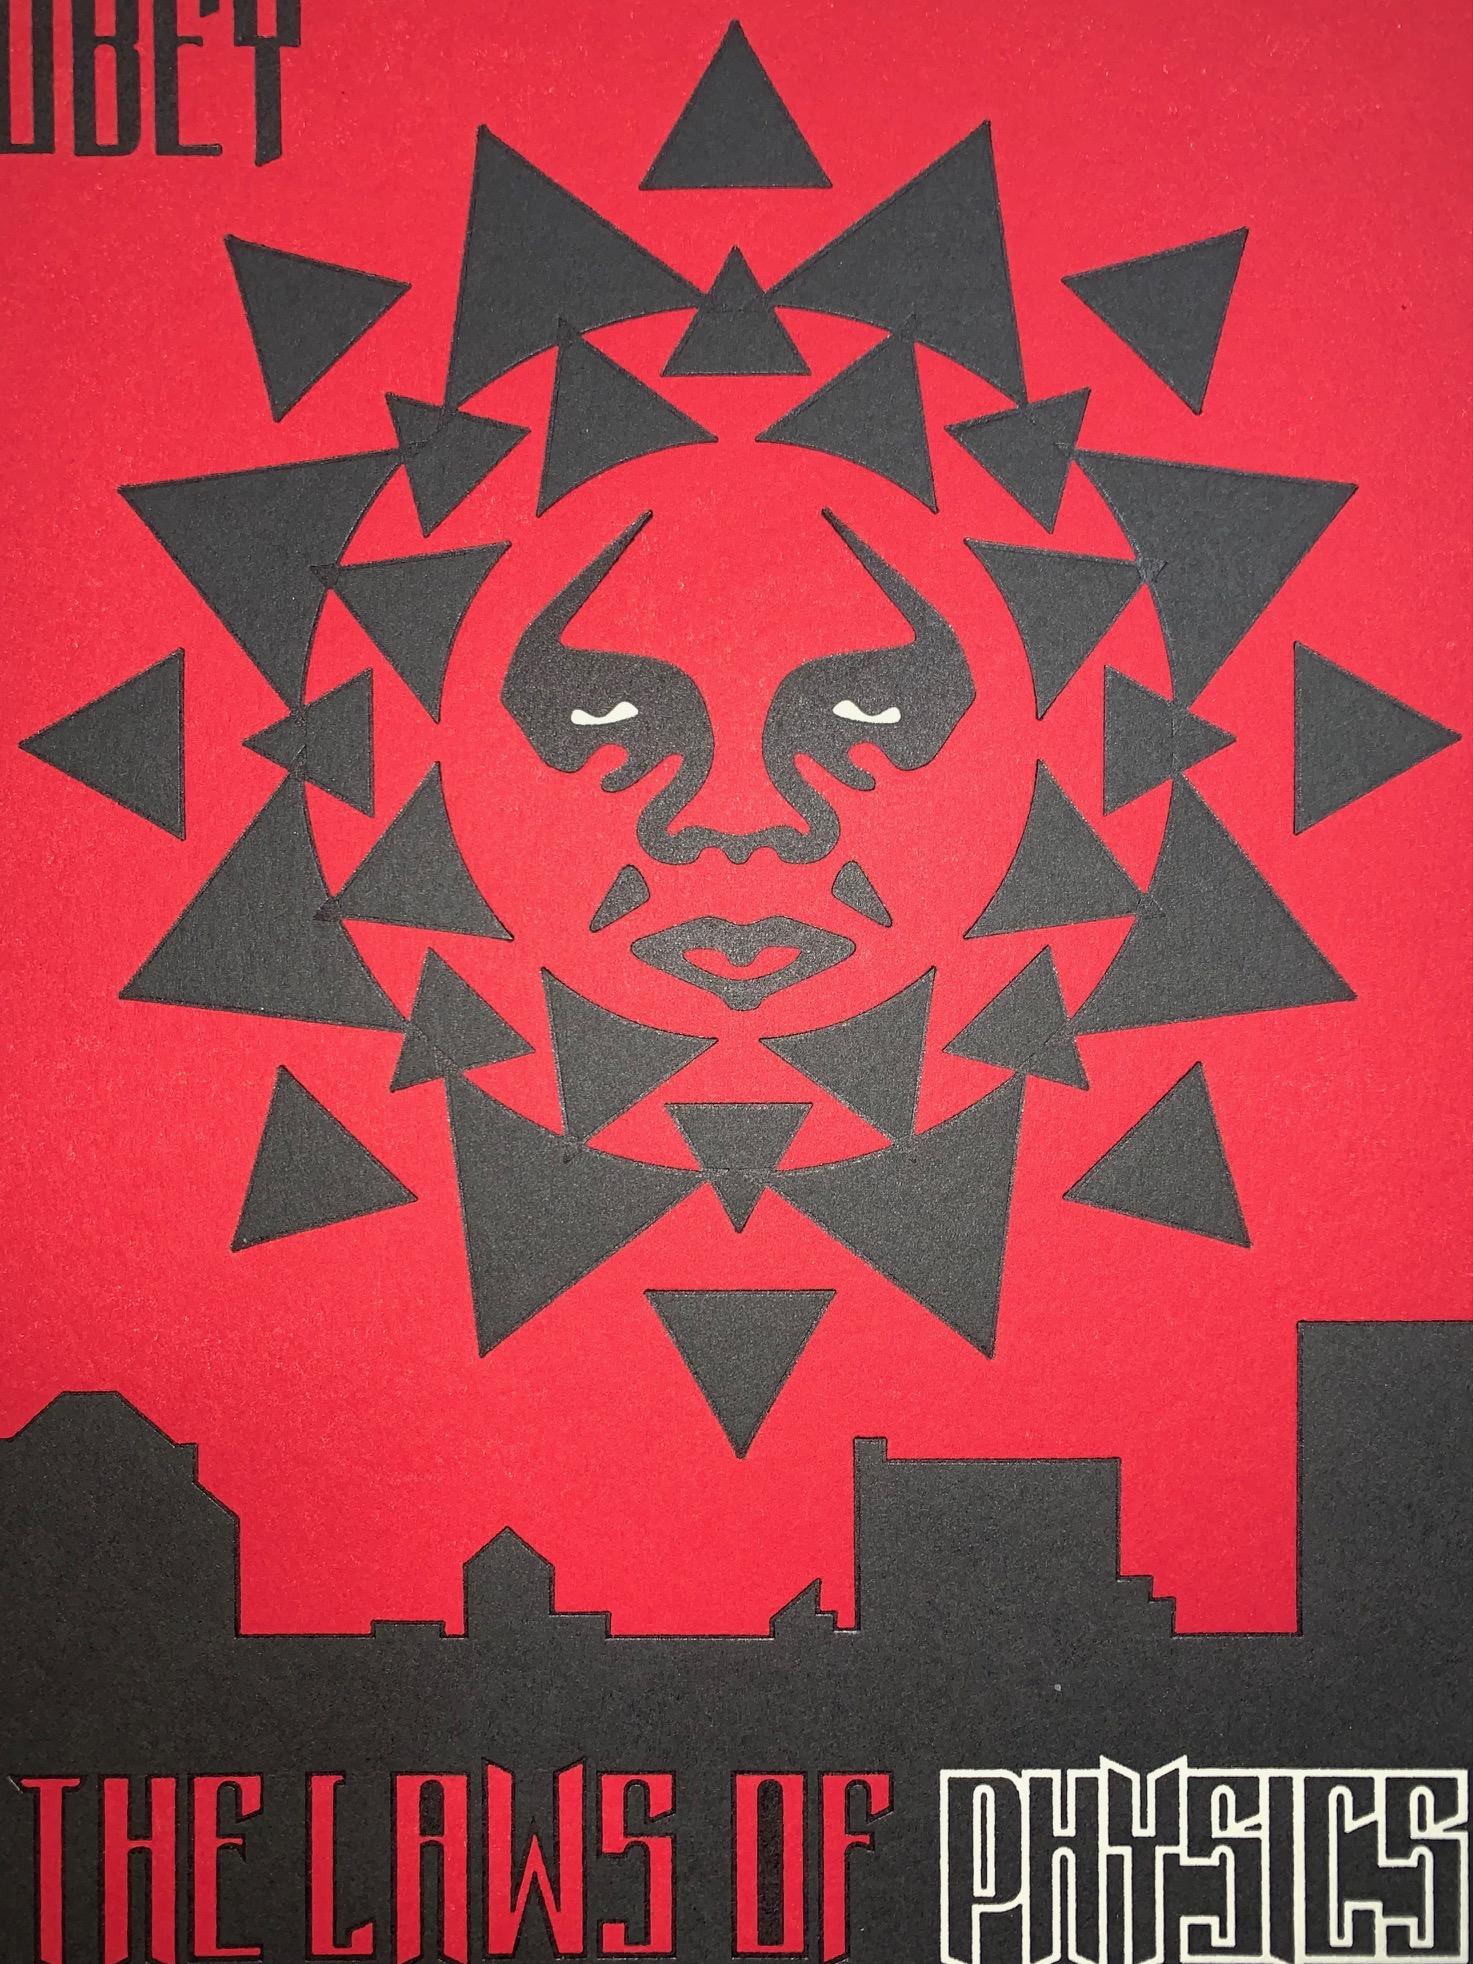 Law Physics Shepard Fairey Letterpress Edition Red & Black For Sale 2